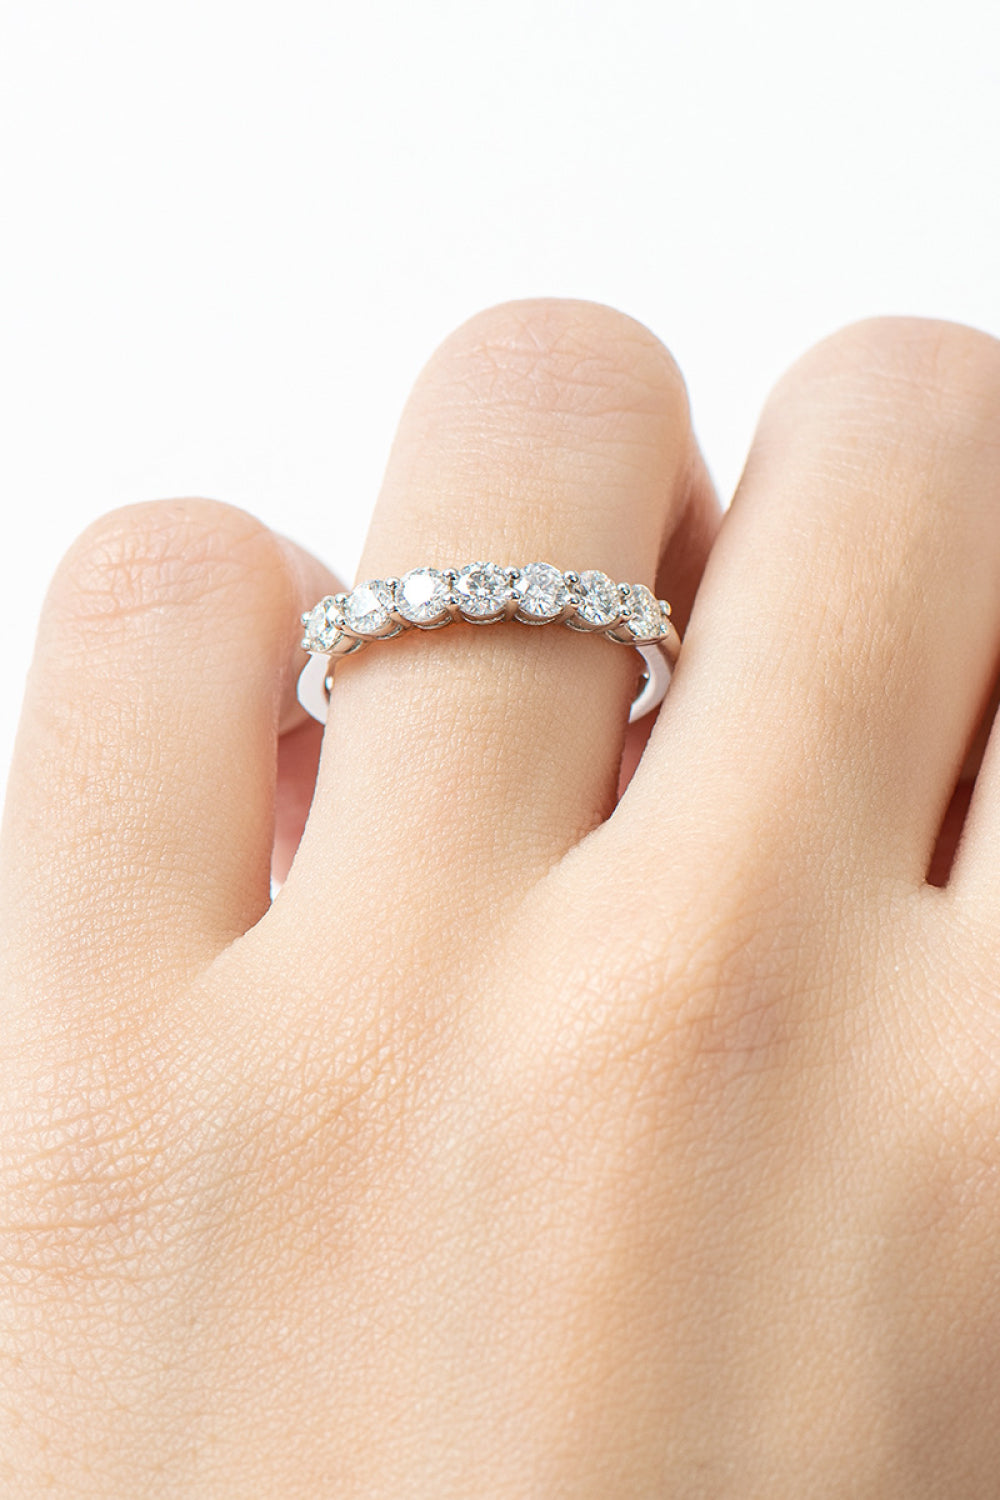 Can't Stop Your Shine Moissanite Platinum-Plated Ring - Tophatter Deals